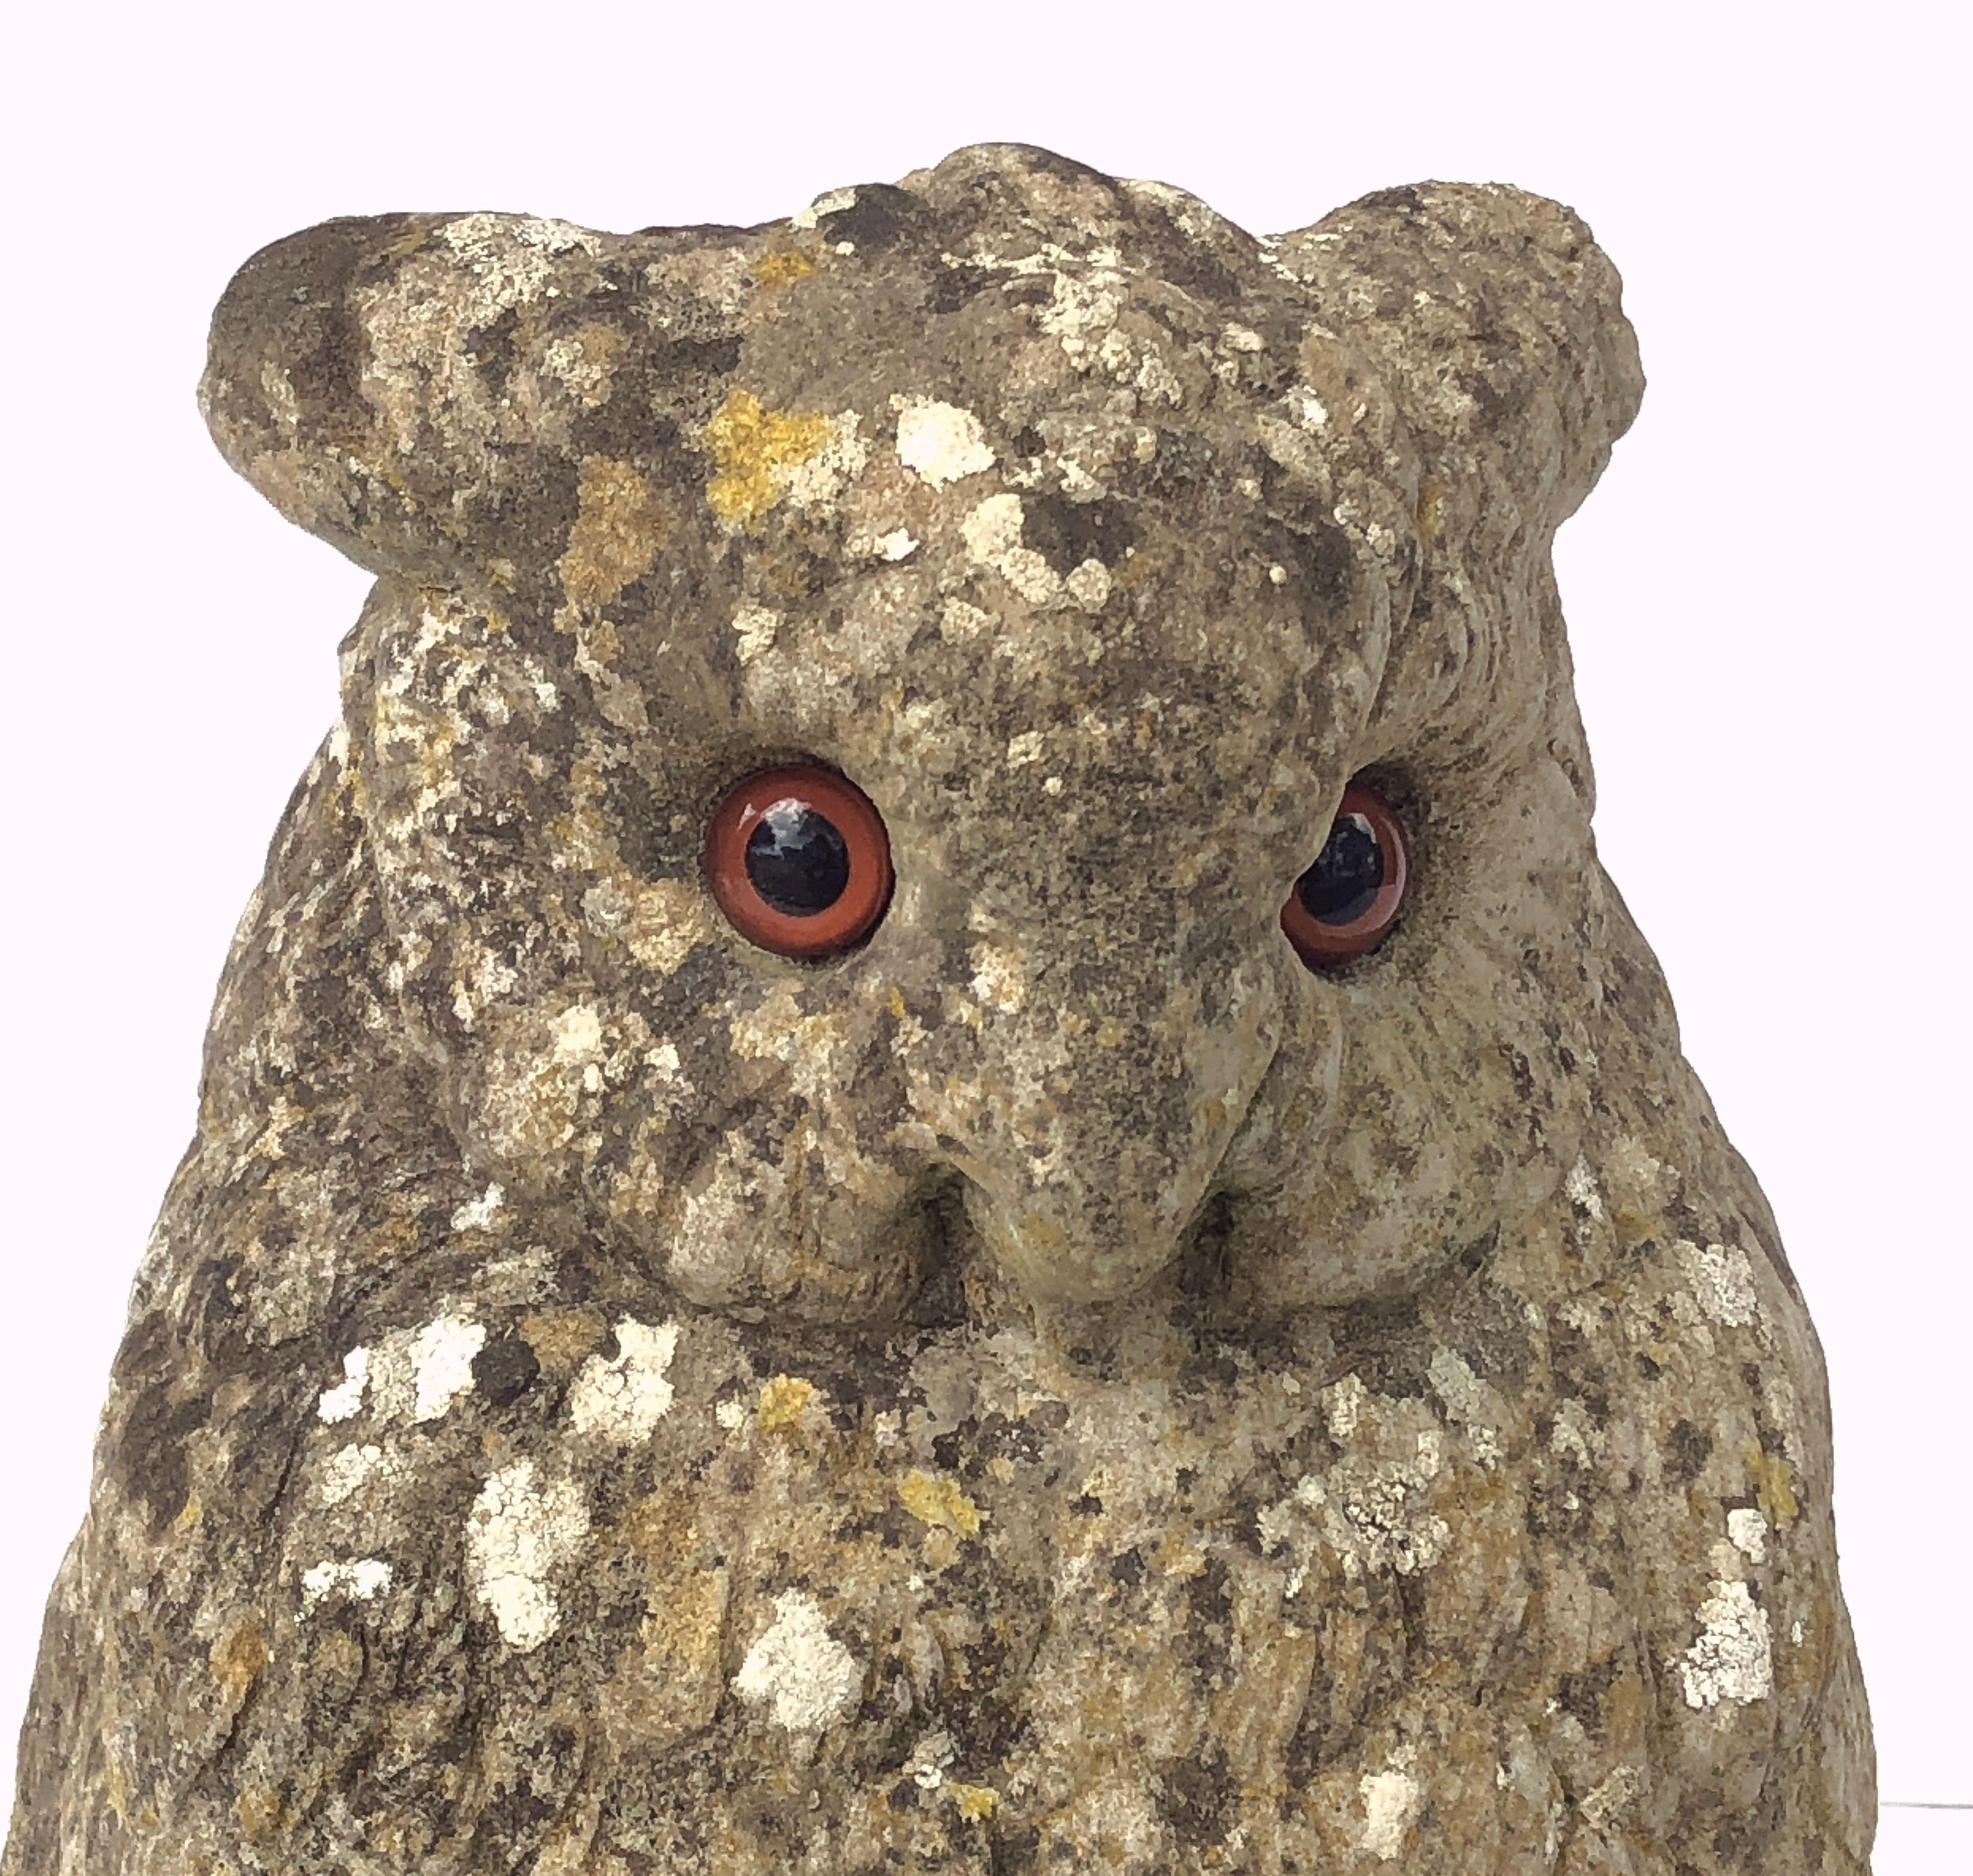 Large English Garden Stone Owl Statues with Glass Eyes 'Individually Priced' 7